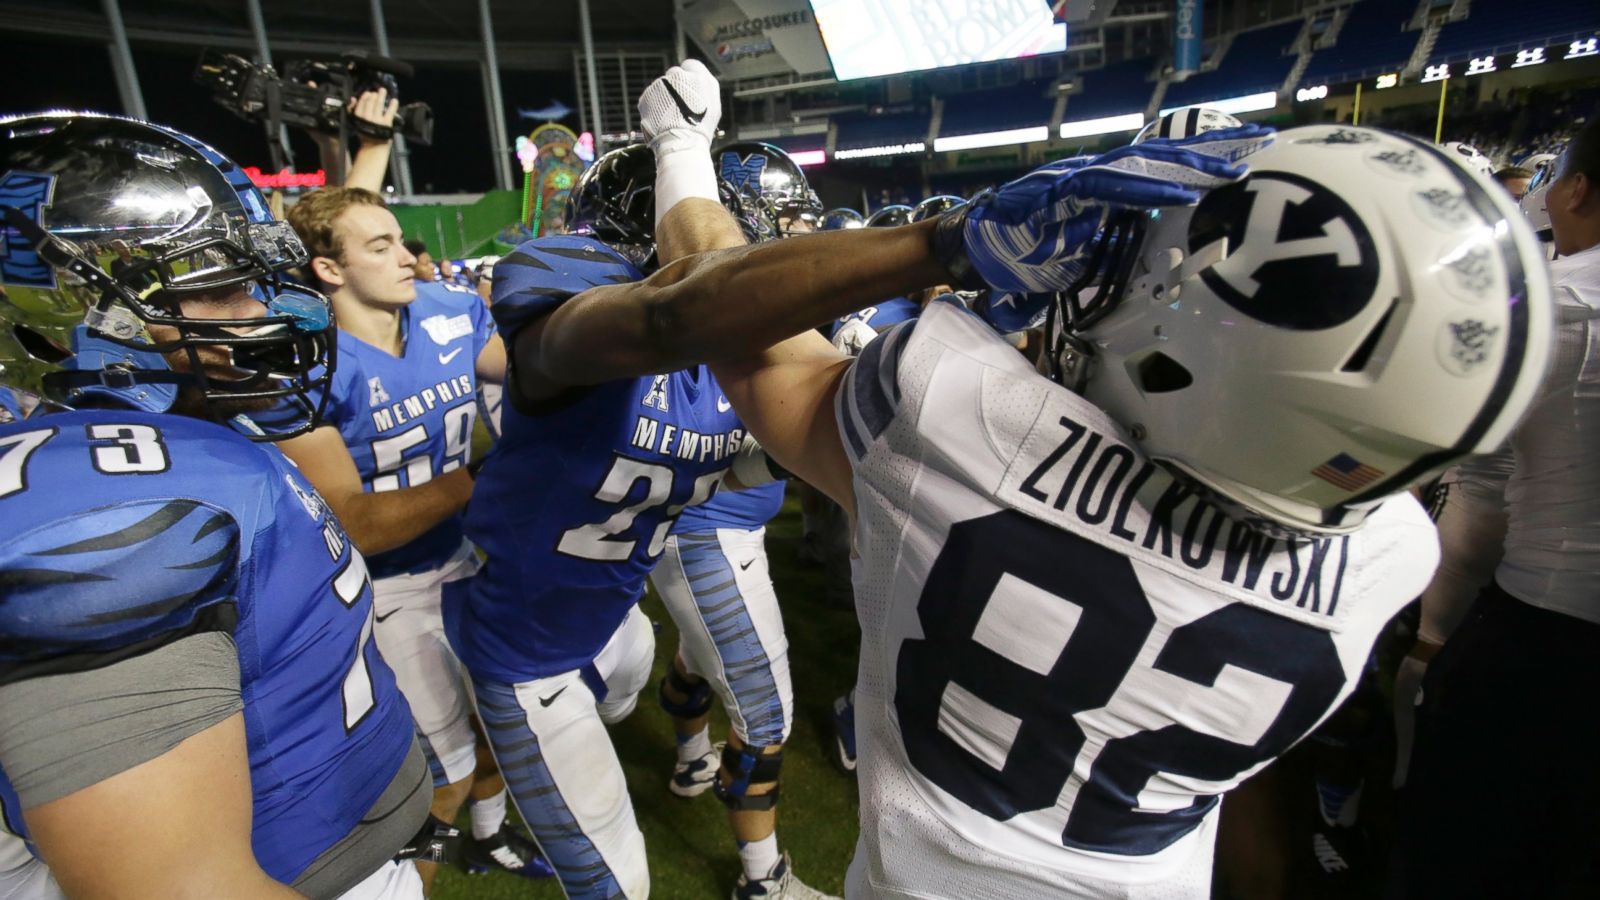 Memphis-BYU Bowl Game Ends With Brawl - ABC News